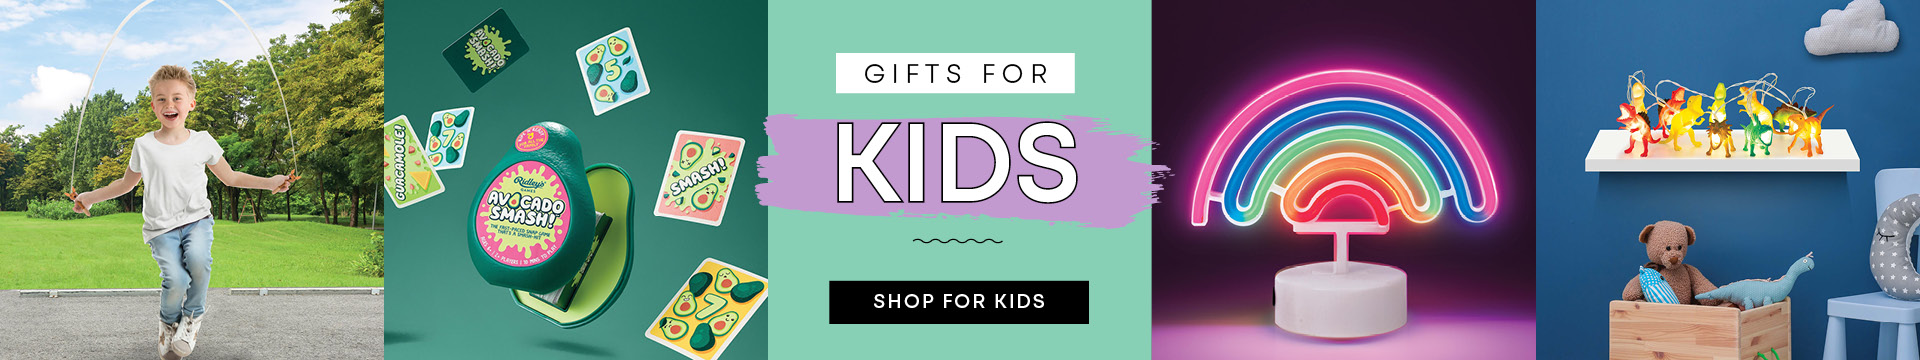 Top Gifts for Kids